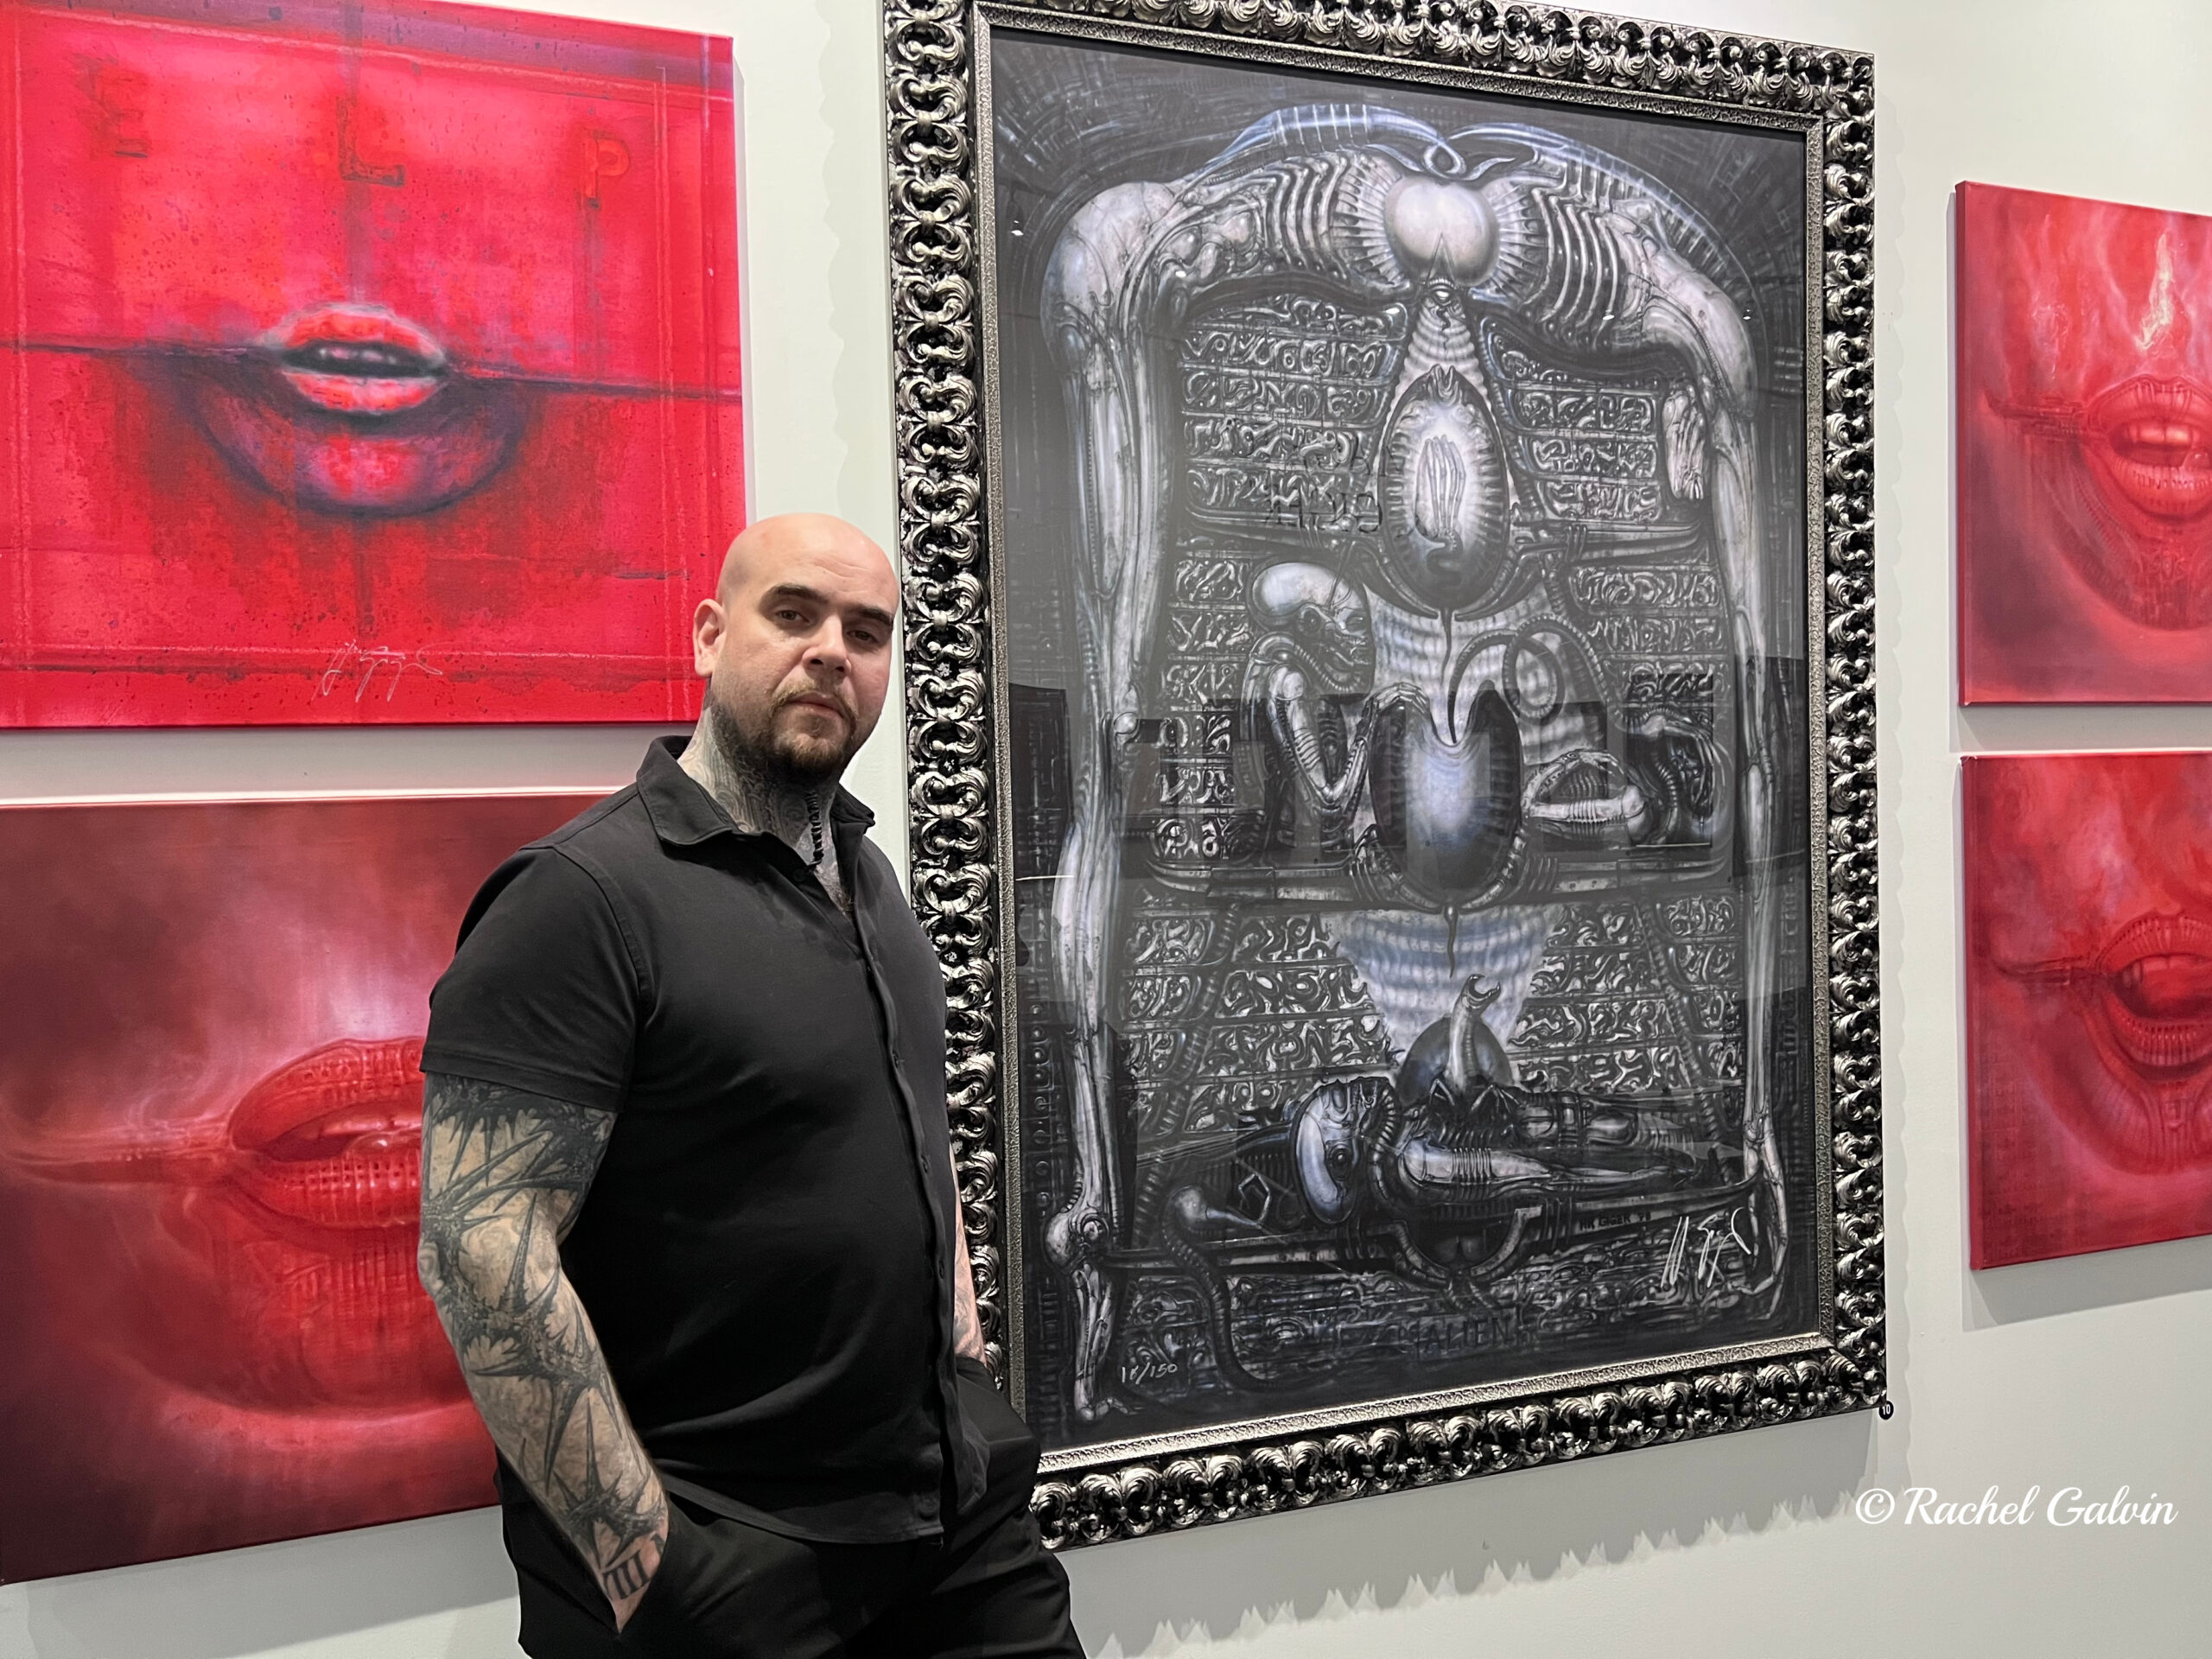 Otherworldly and Ominous, H.R. Giger’s encapsulating masterpieces are now on display